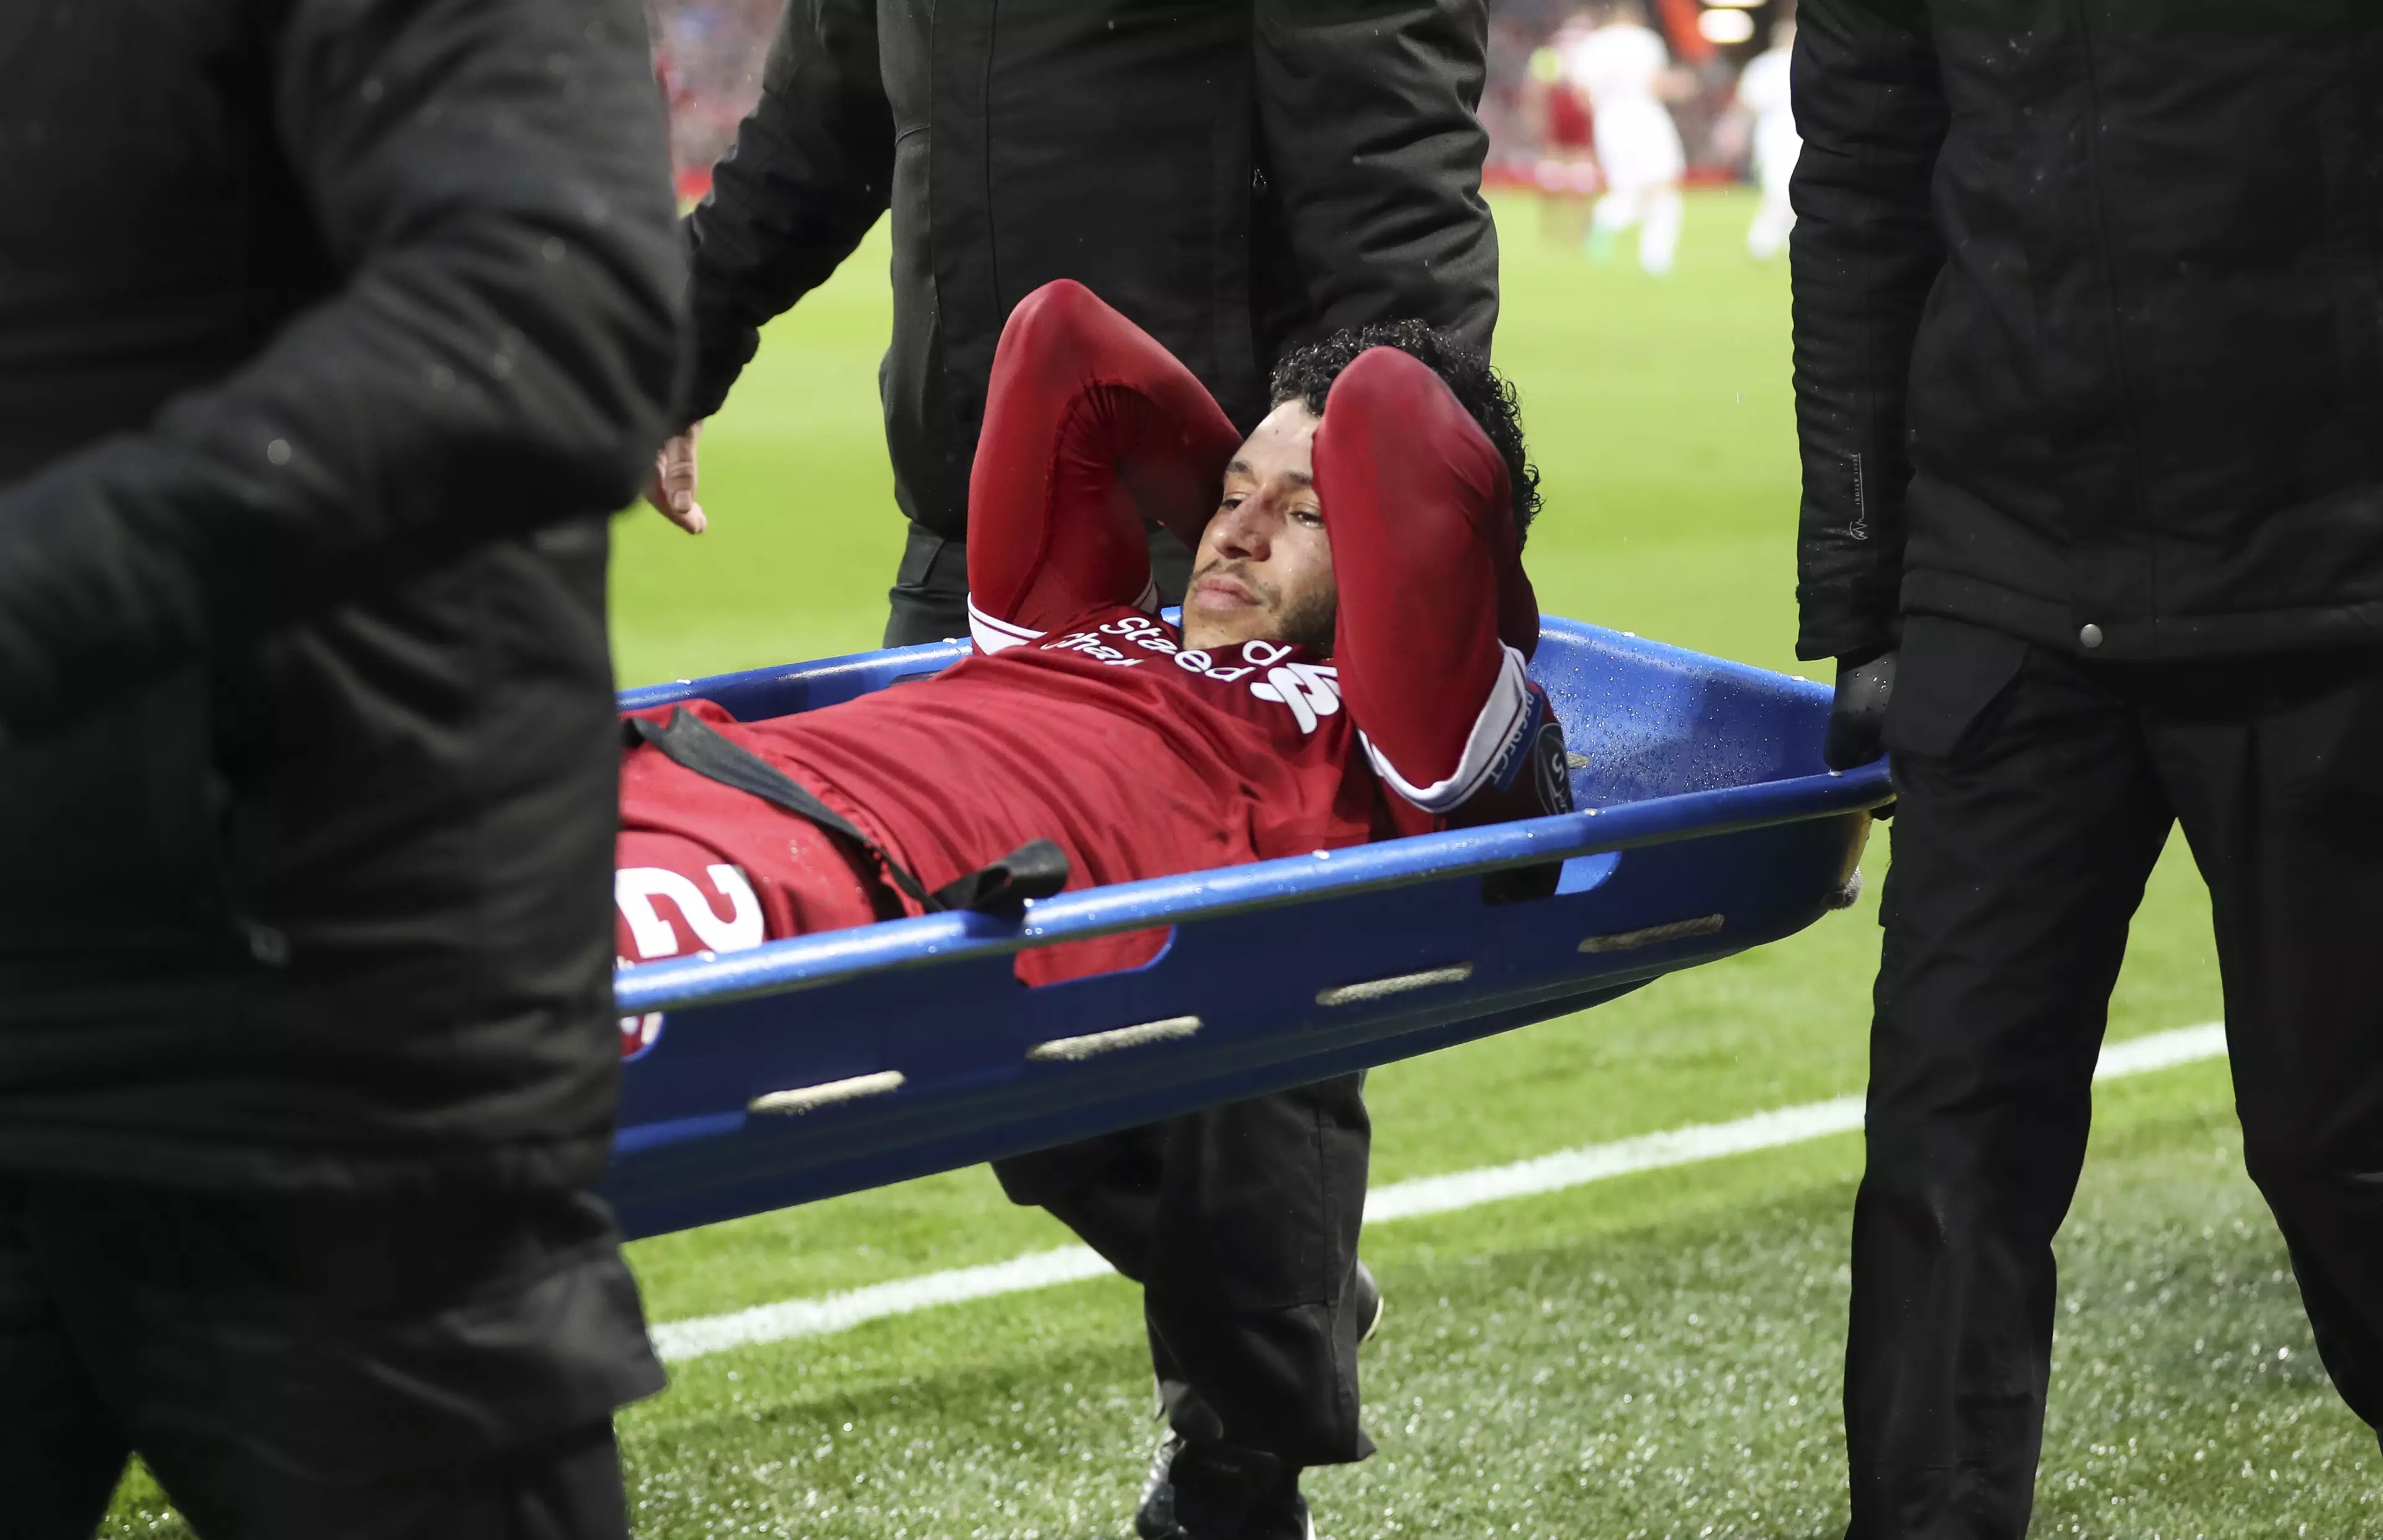 Oxlade-Chamberlain carried off on a stretcher. Image: PA